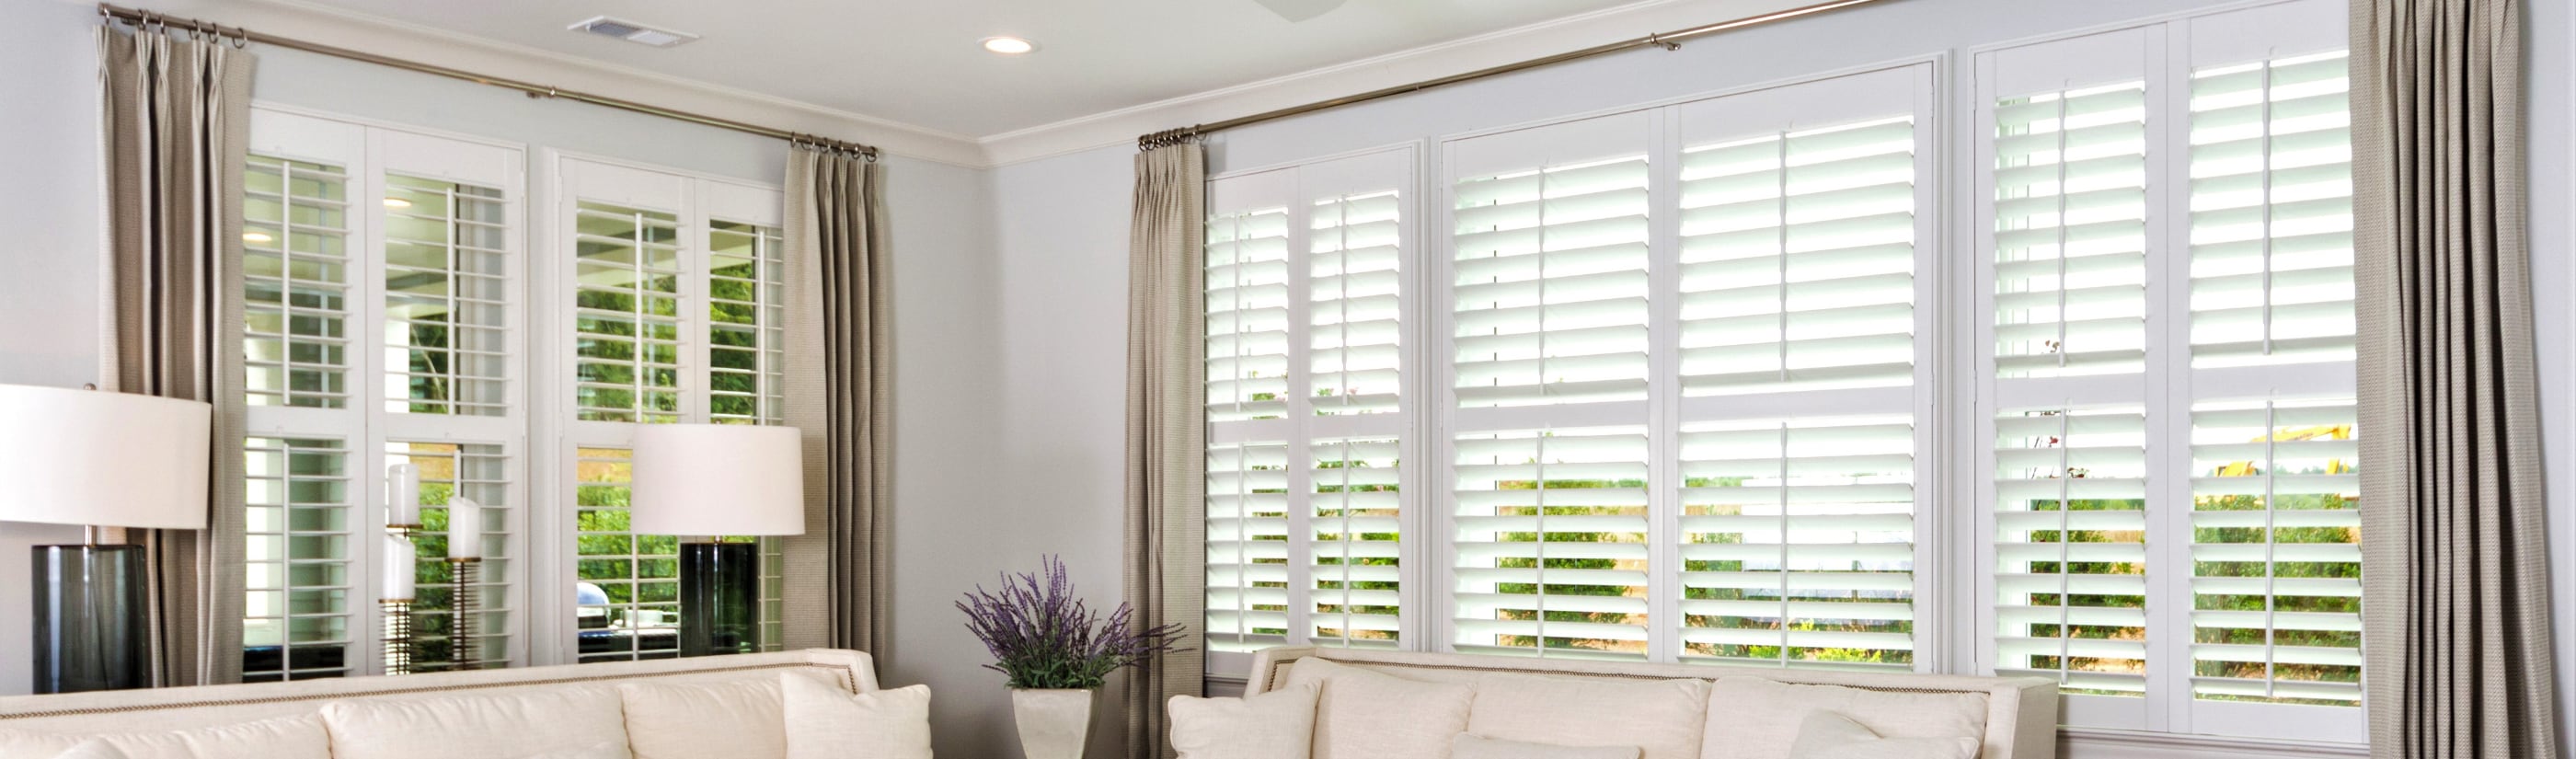 Polywood Shutters Paints In Phoenix